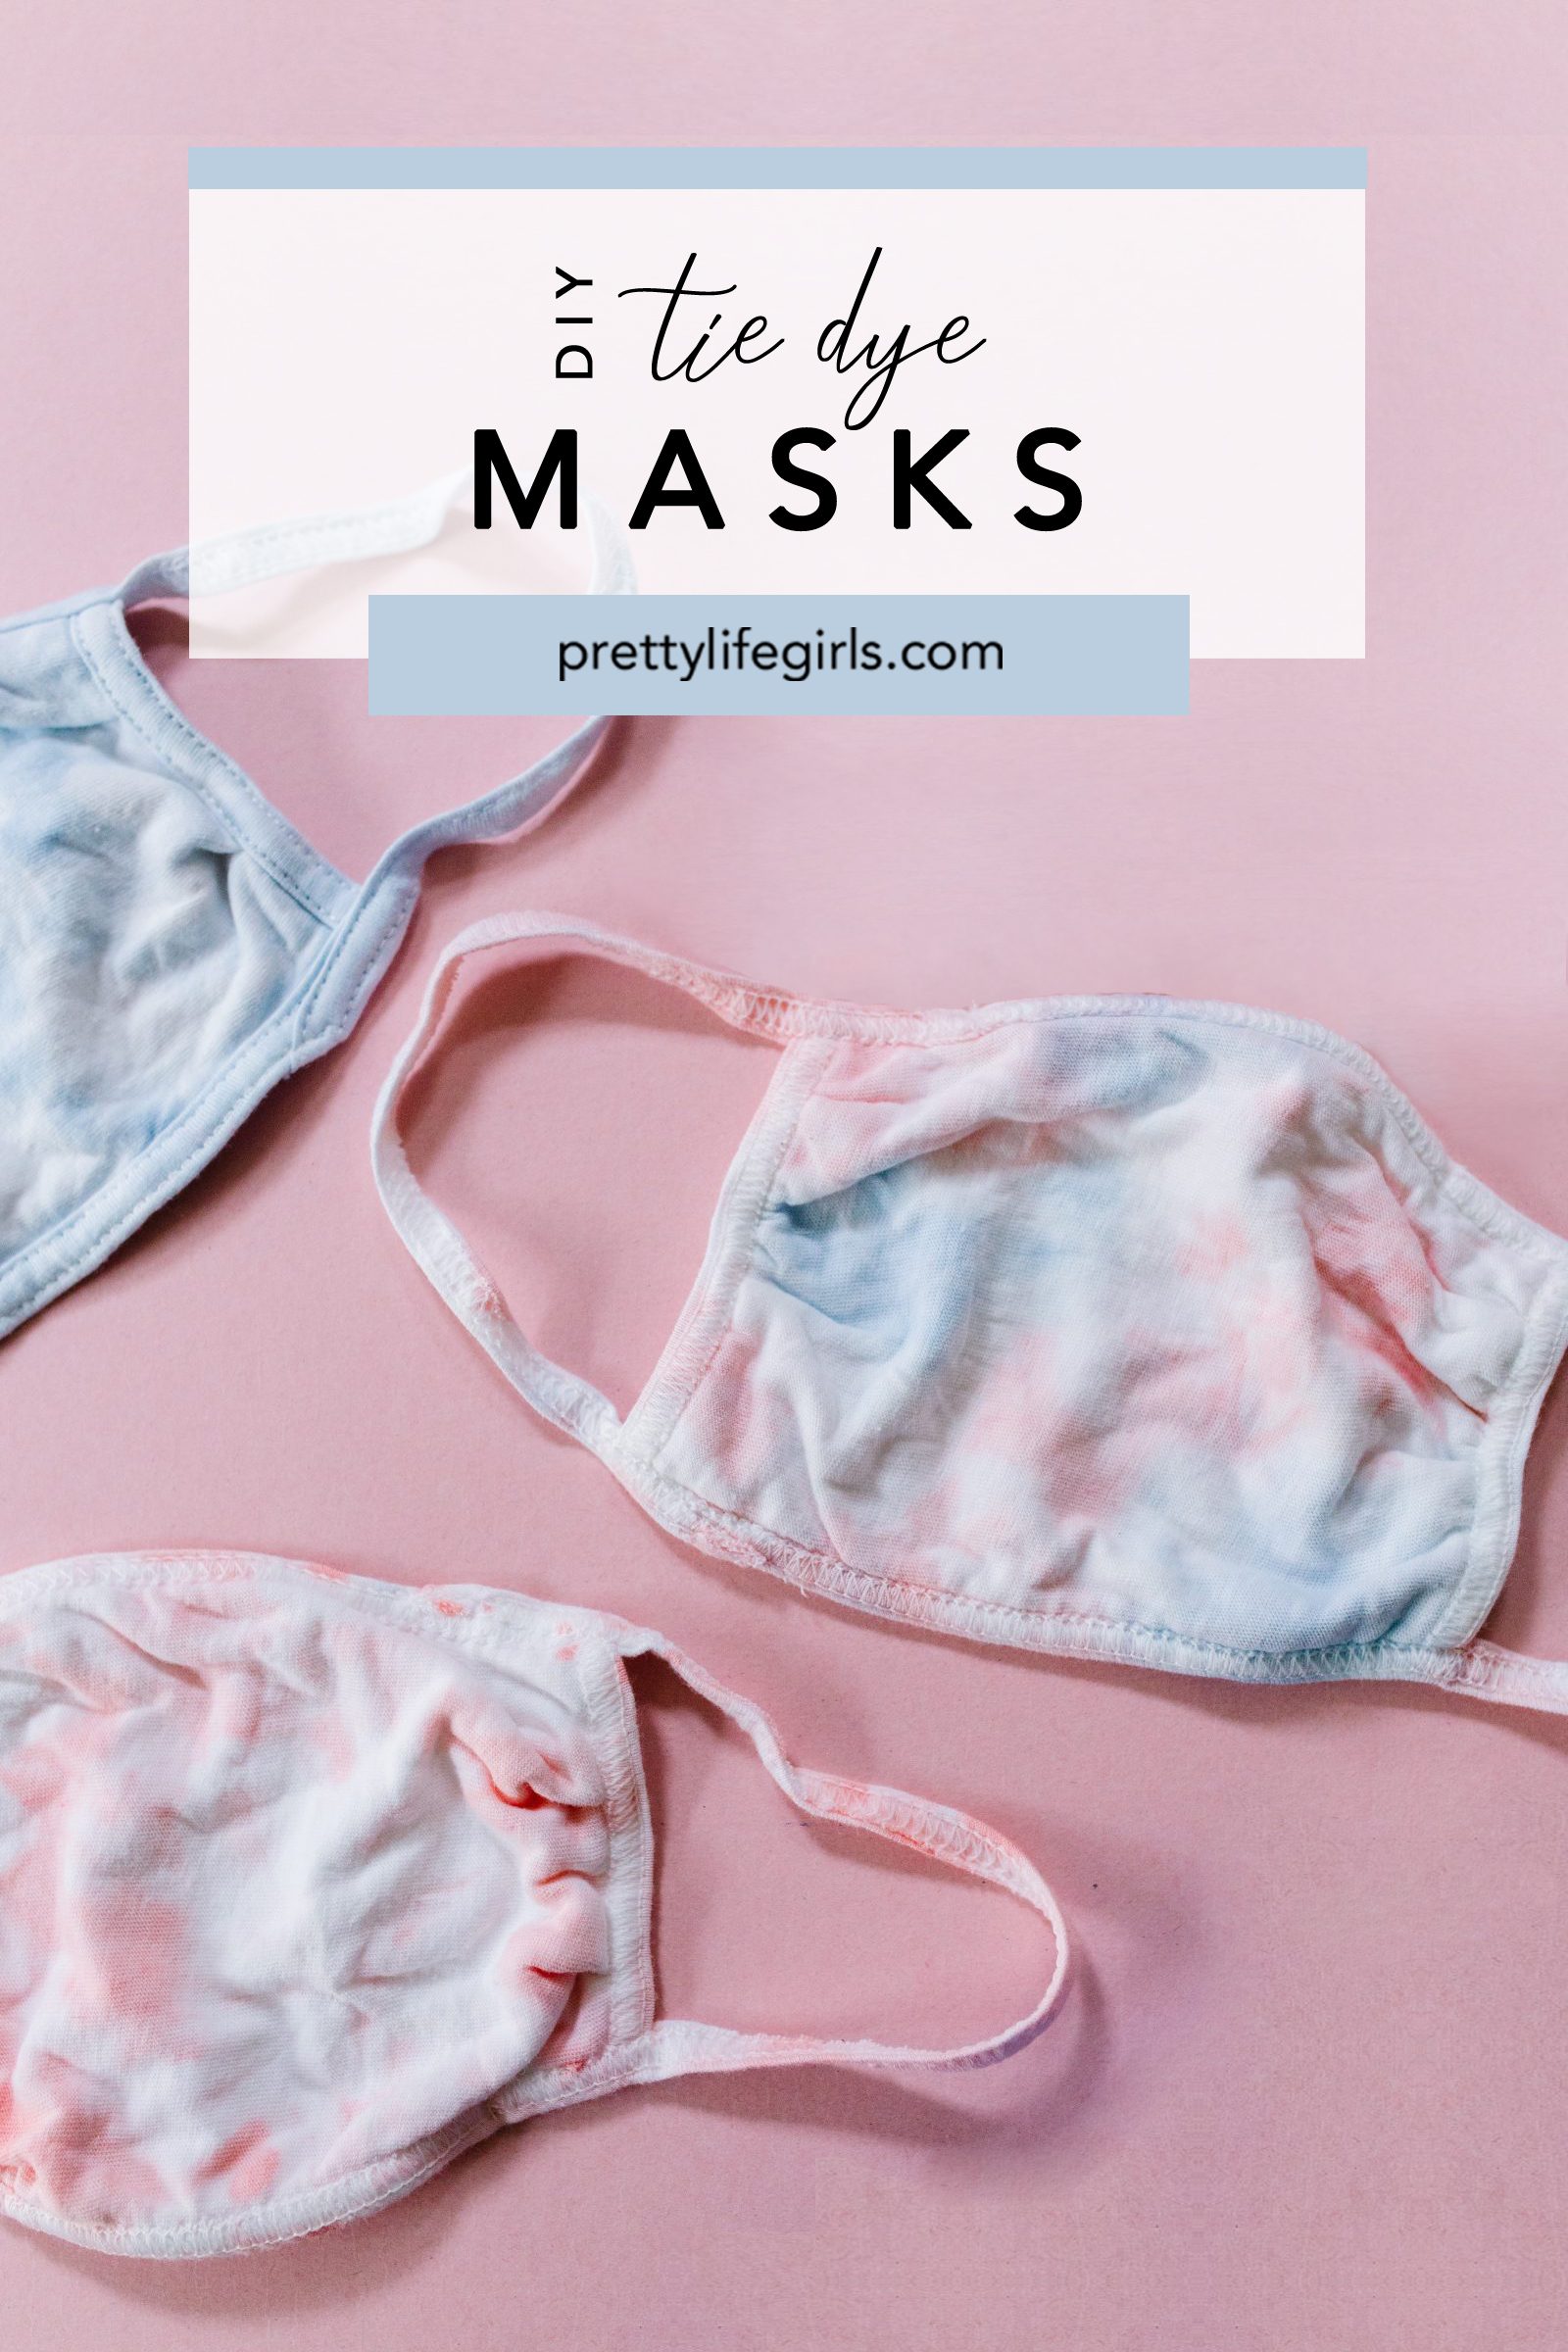 DIY Tie Dye Masks + a tutorial featured by Top US Craft Blog + The Pretty Life Girls